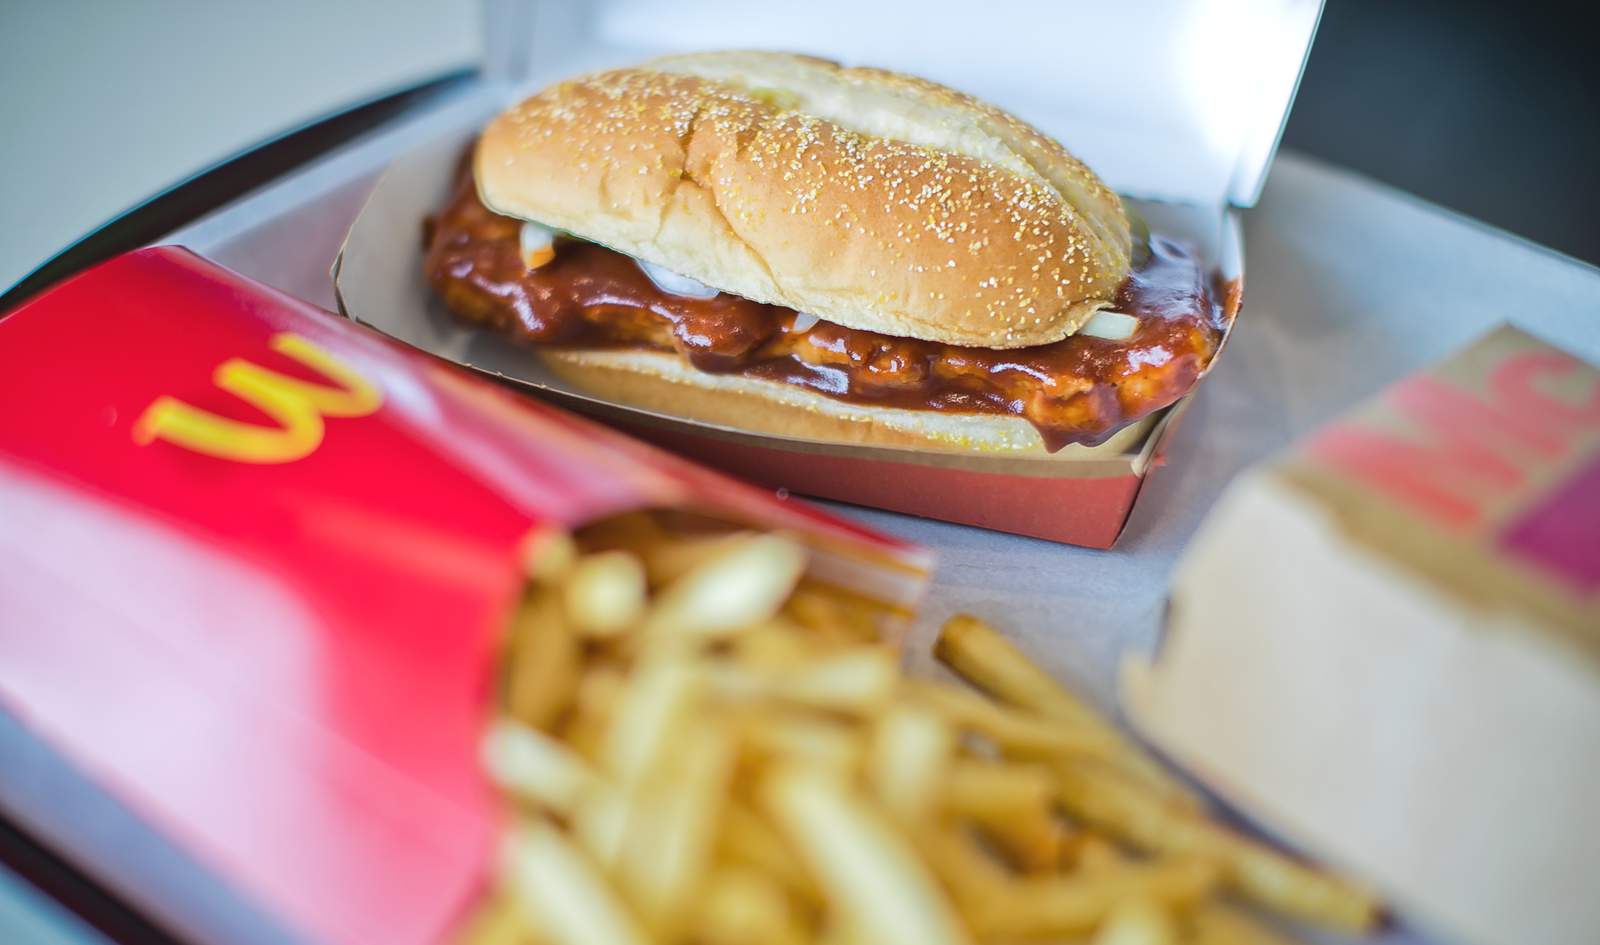 McRib makes saucy return to McDonald’s nationwide for first time since 2012